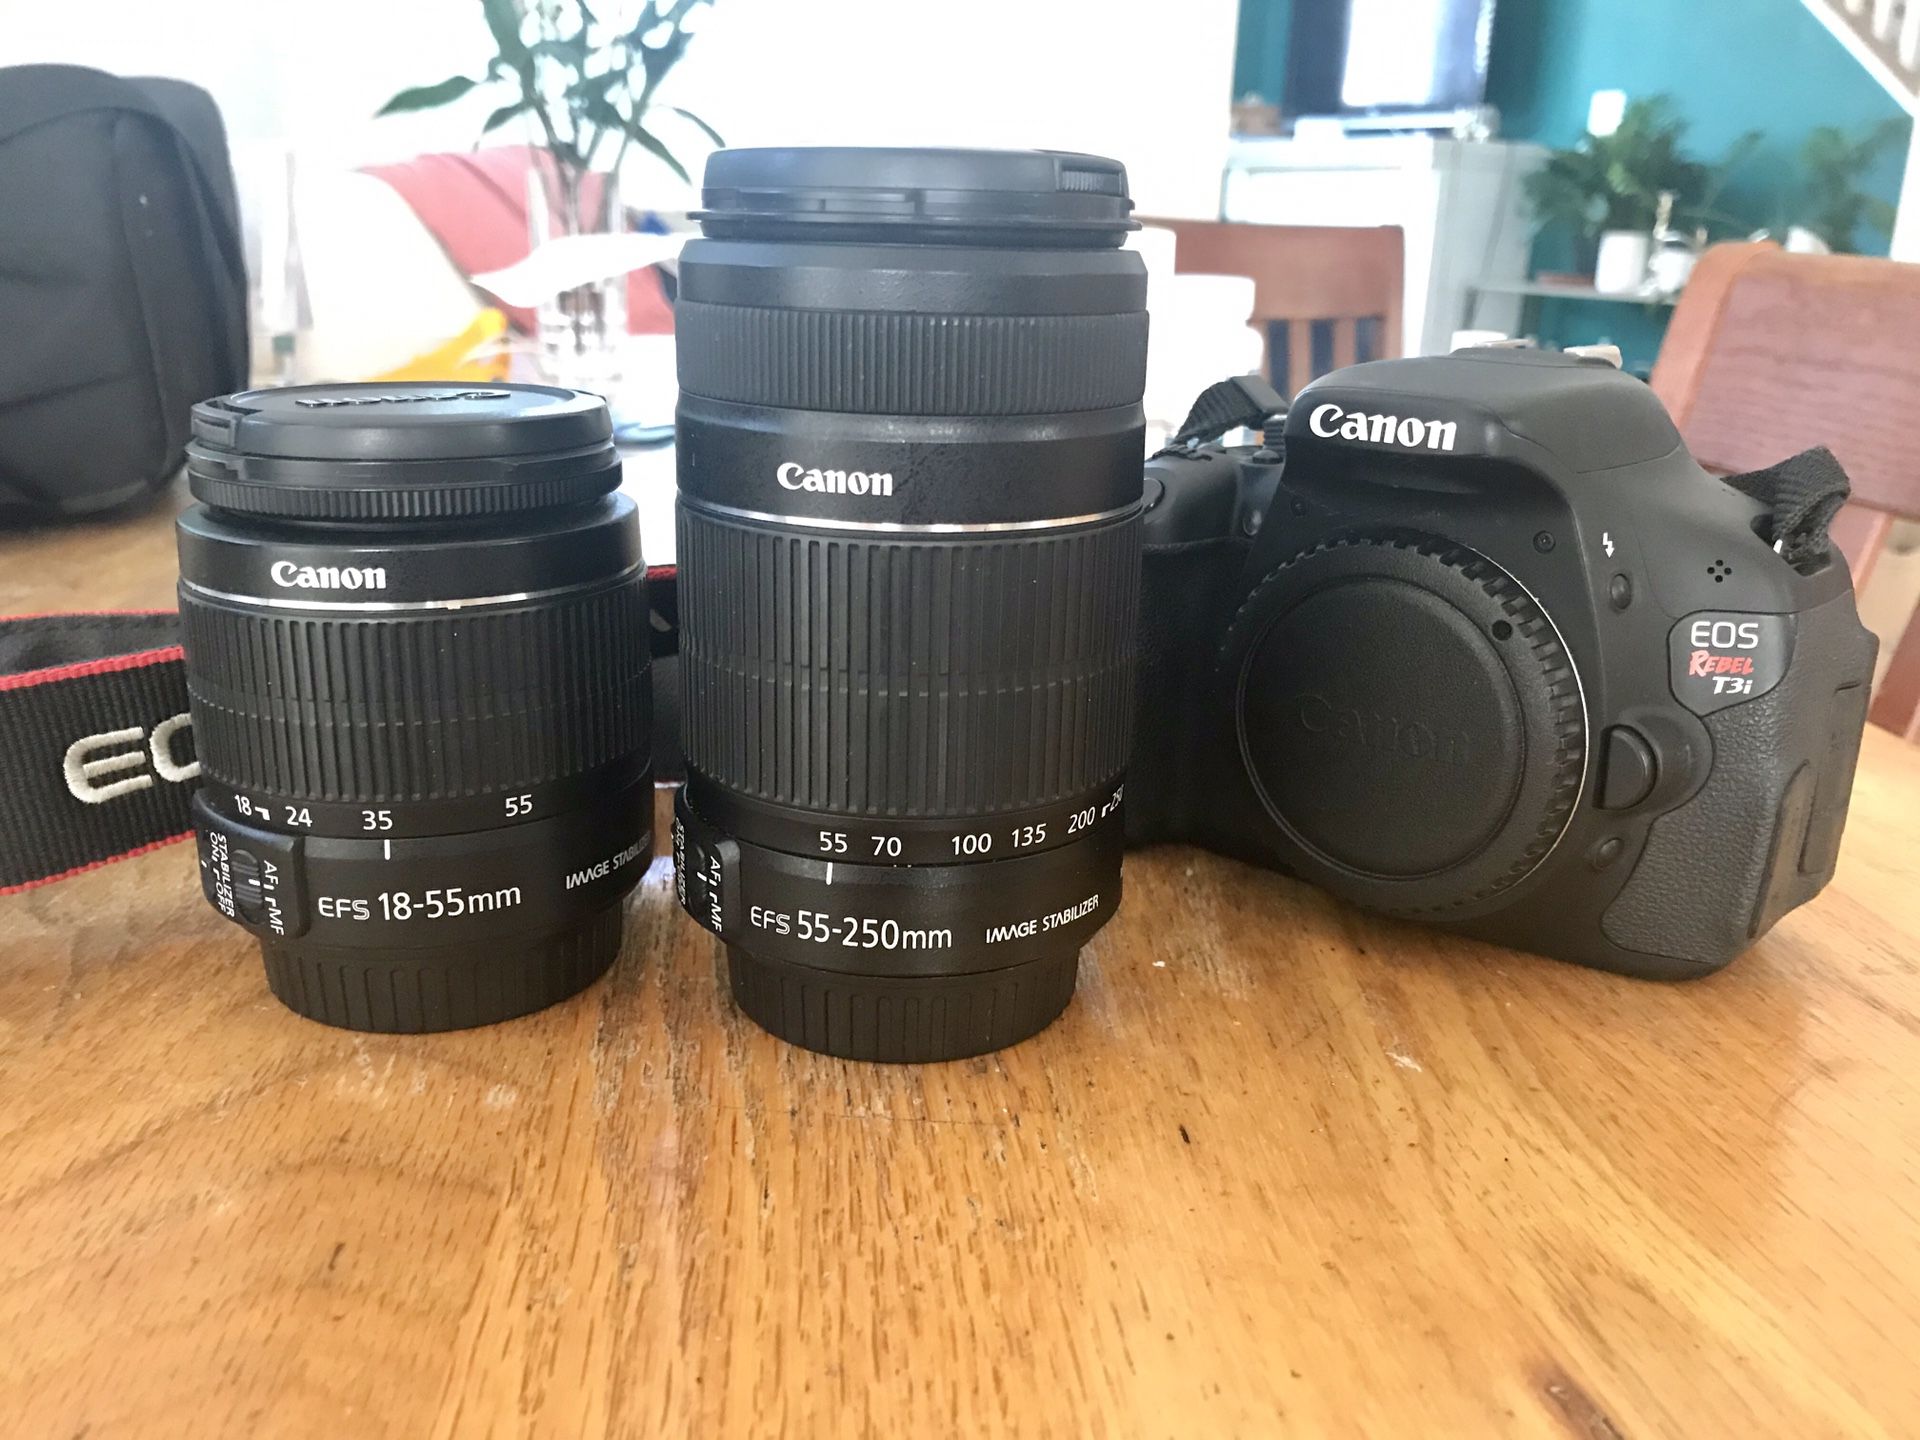 Canon rebel t3i with two lenses and bag